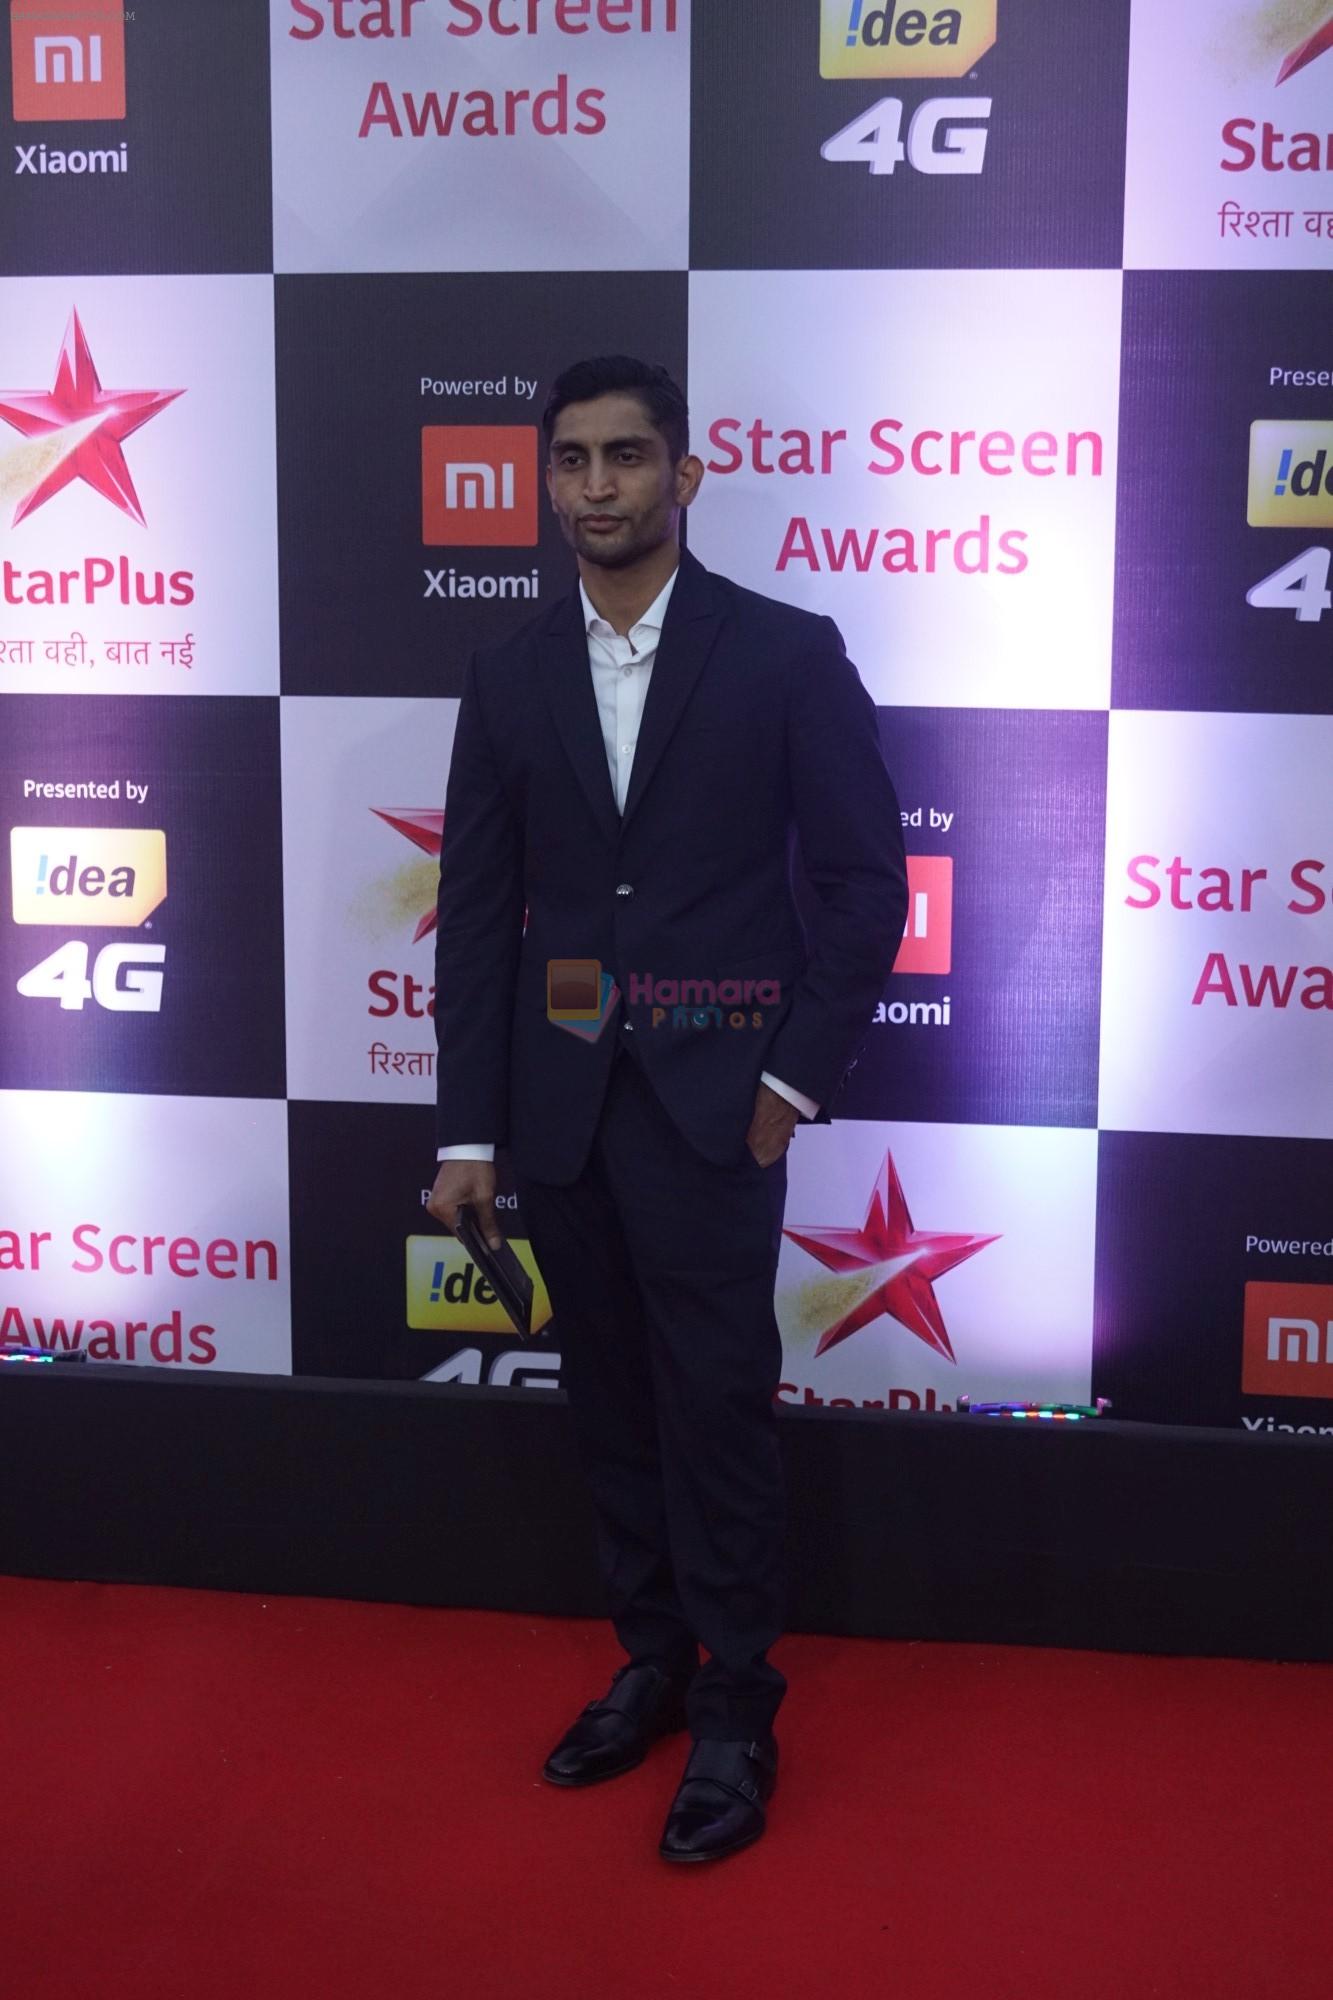 at Red Carpet of Star Screen Awards 2018 on 16th Dec 2018